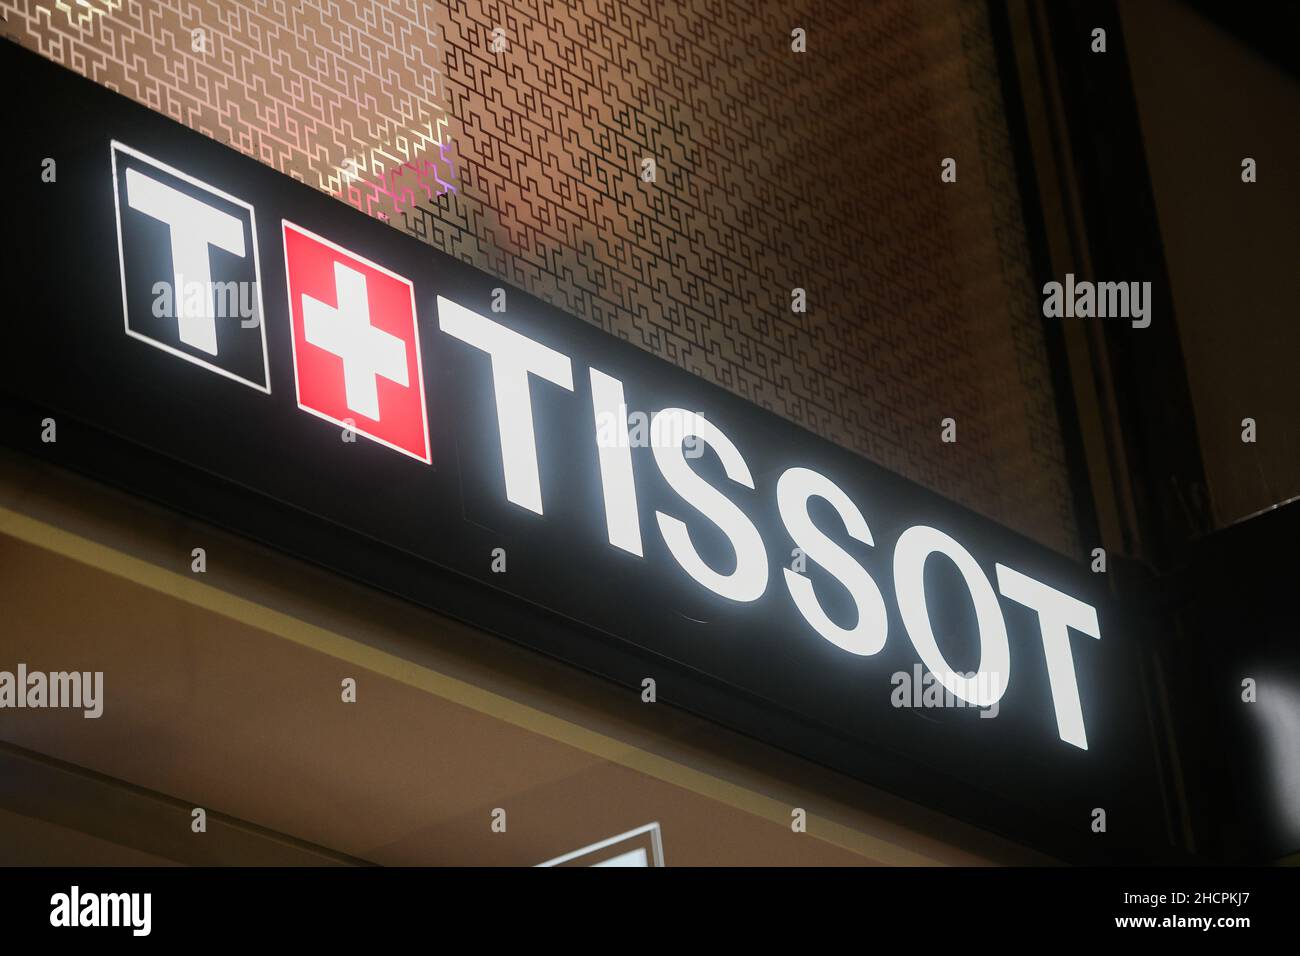 Milan, Italy - September 24, 2021: Tissot logo displayed on a facade of a store in Milan. Stock Photo